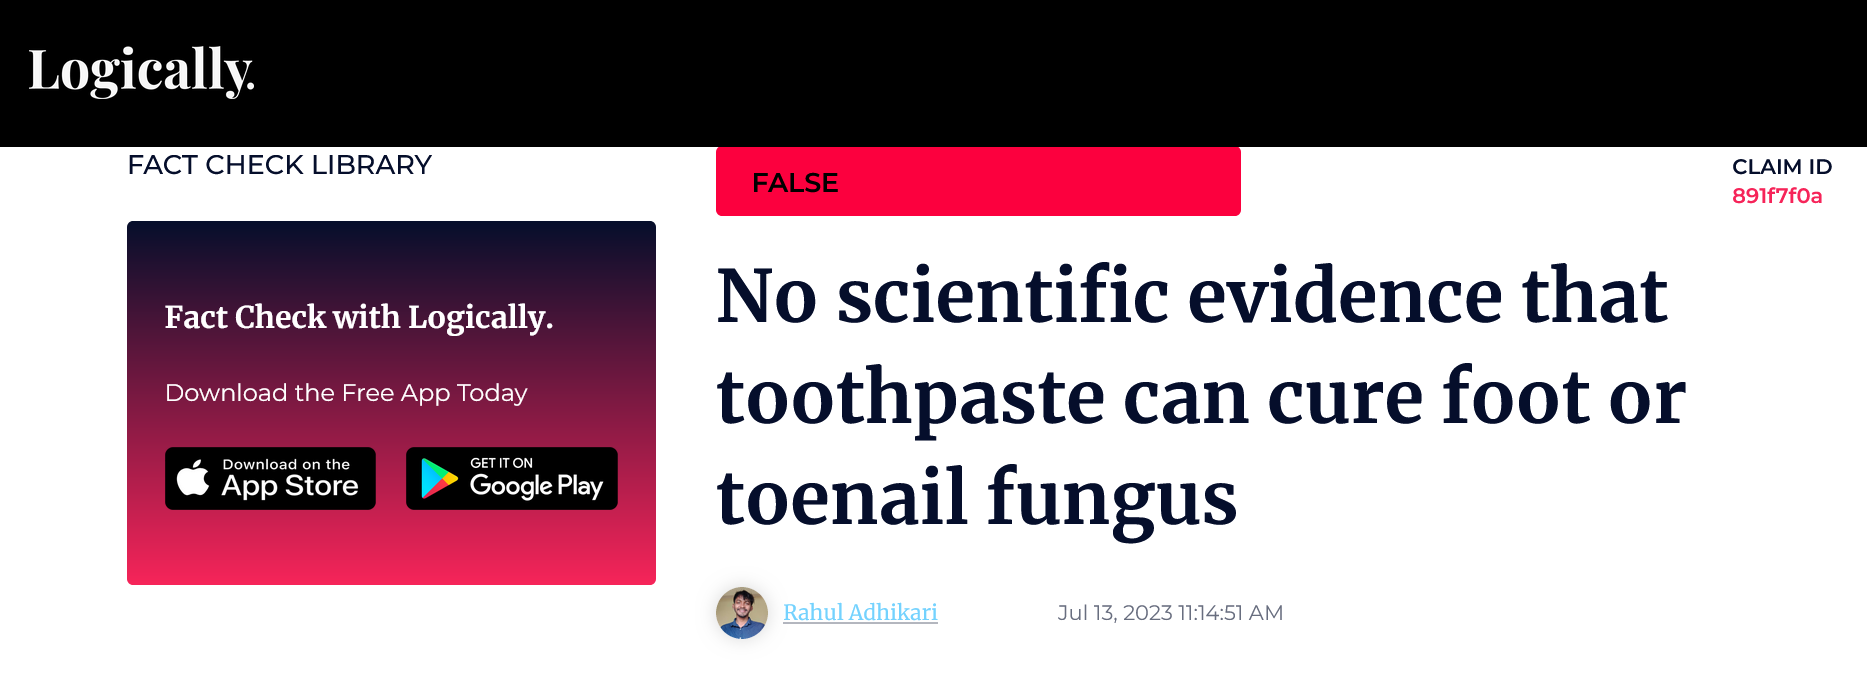 Screenshot 2023 07 17 At 13 19 18 False No Scientific Evidence That Toothpaste Can Cure Foot Or Toenail Fungus